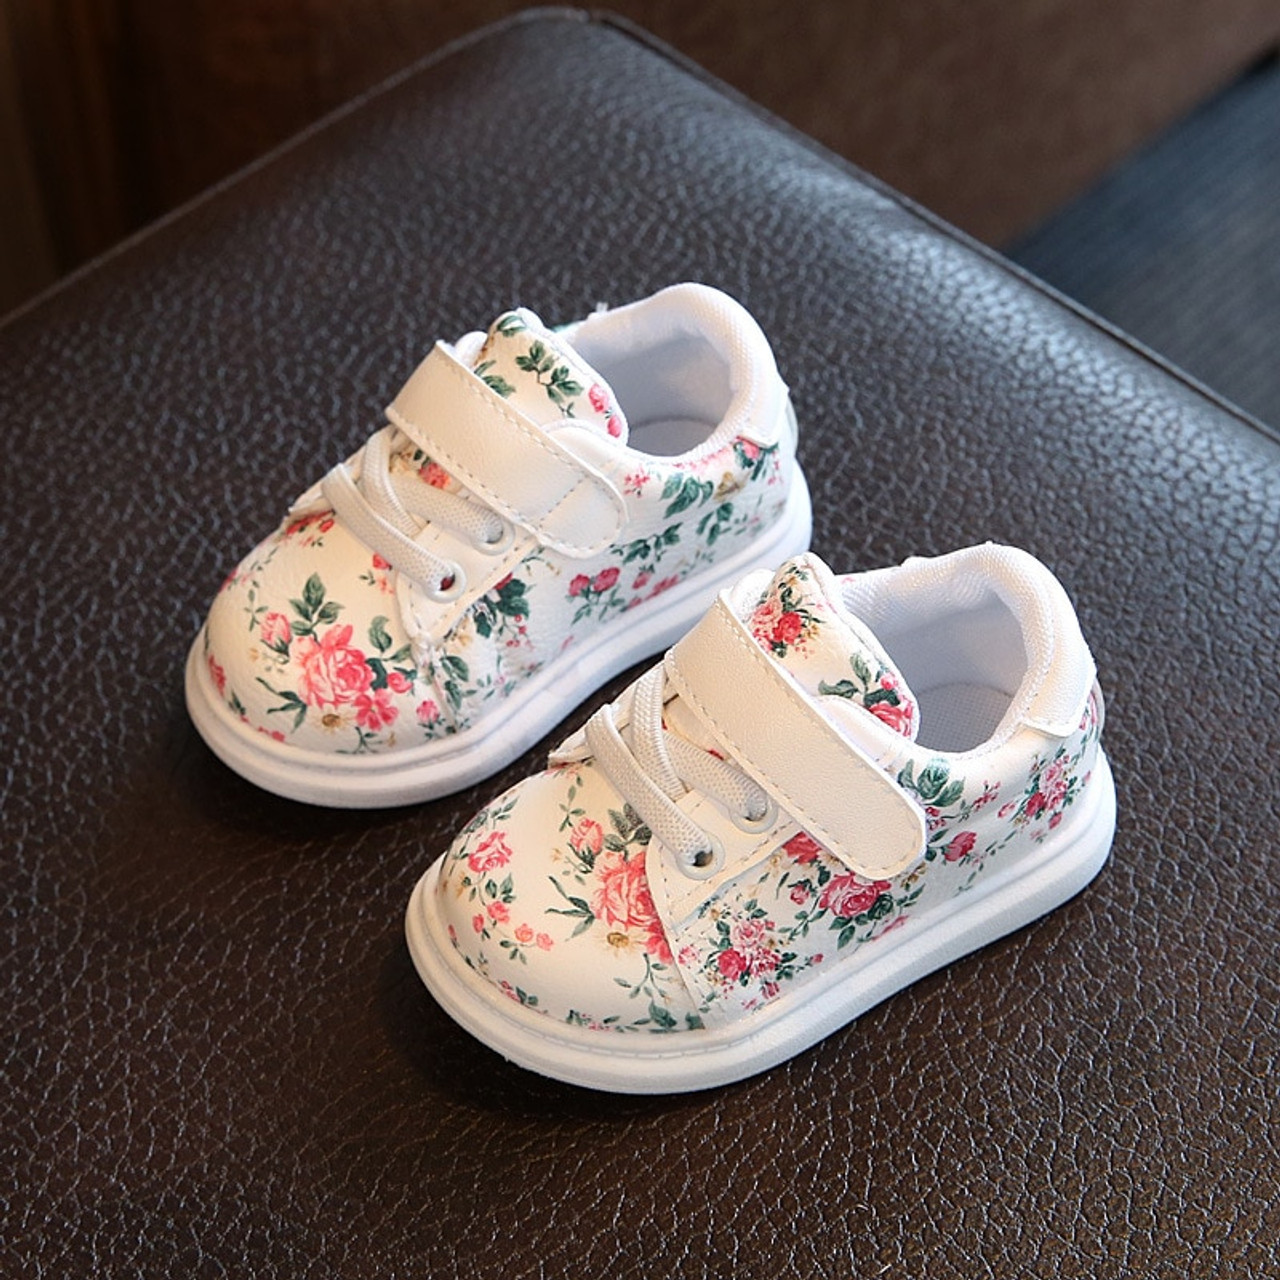 white baby shoes